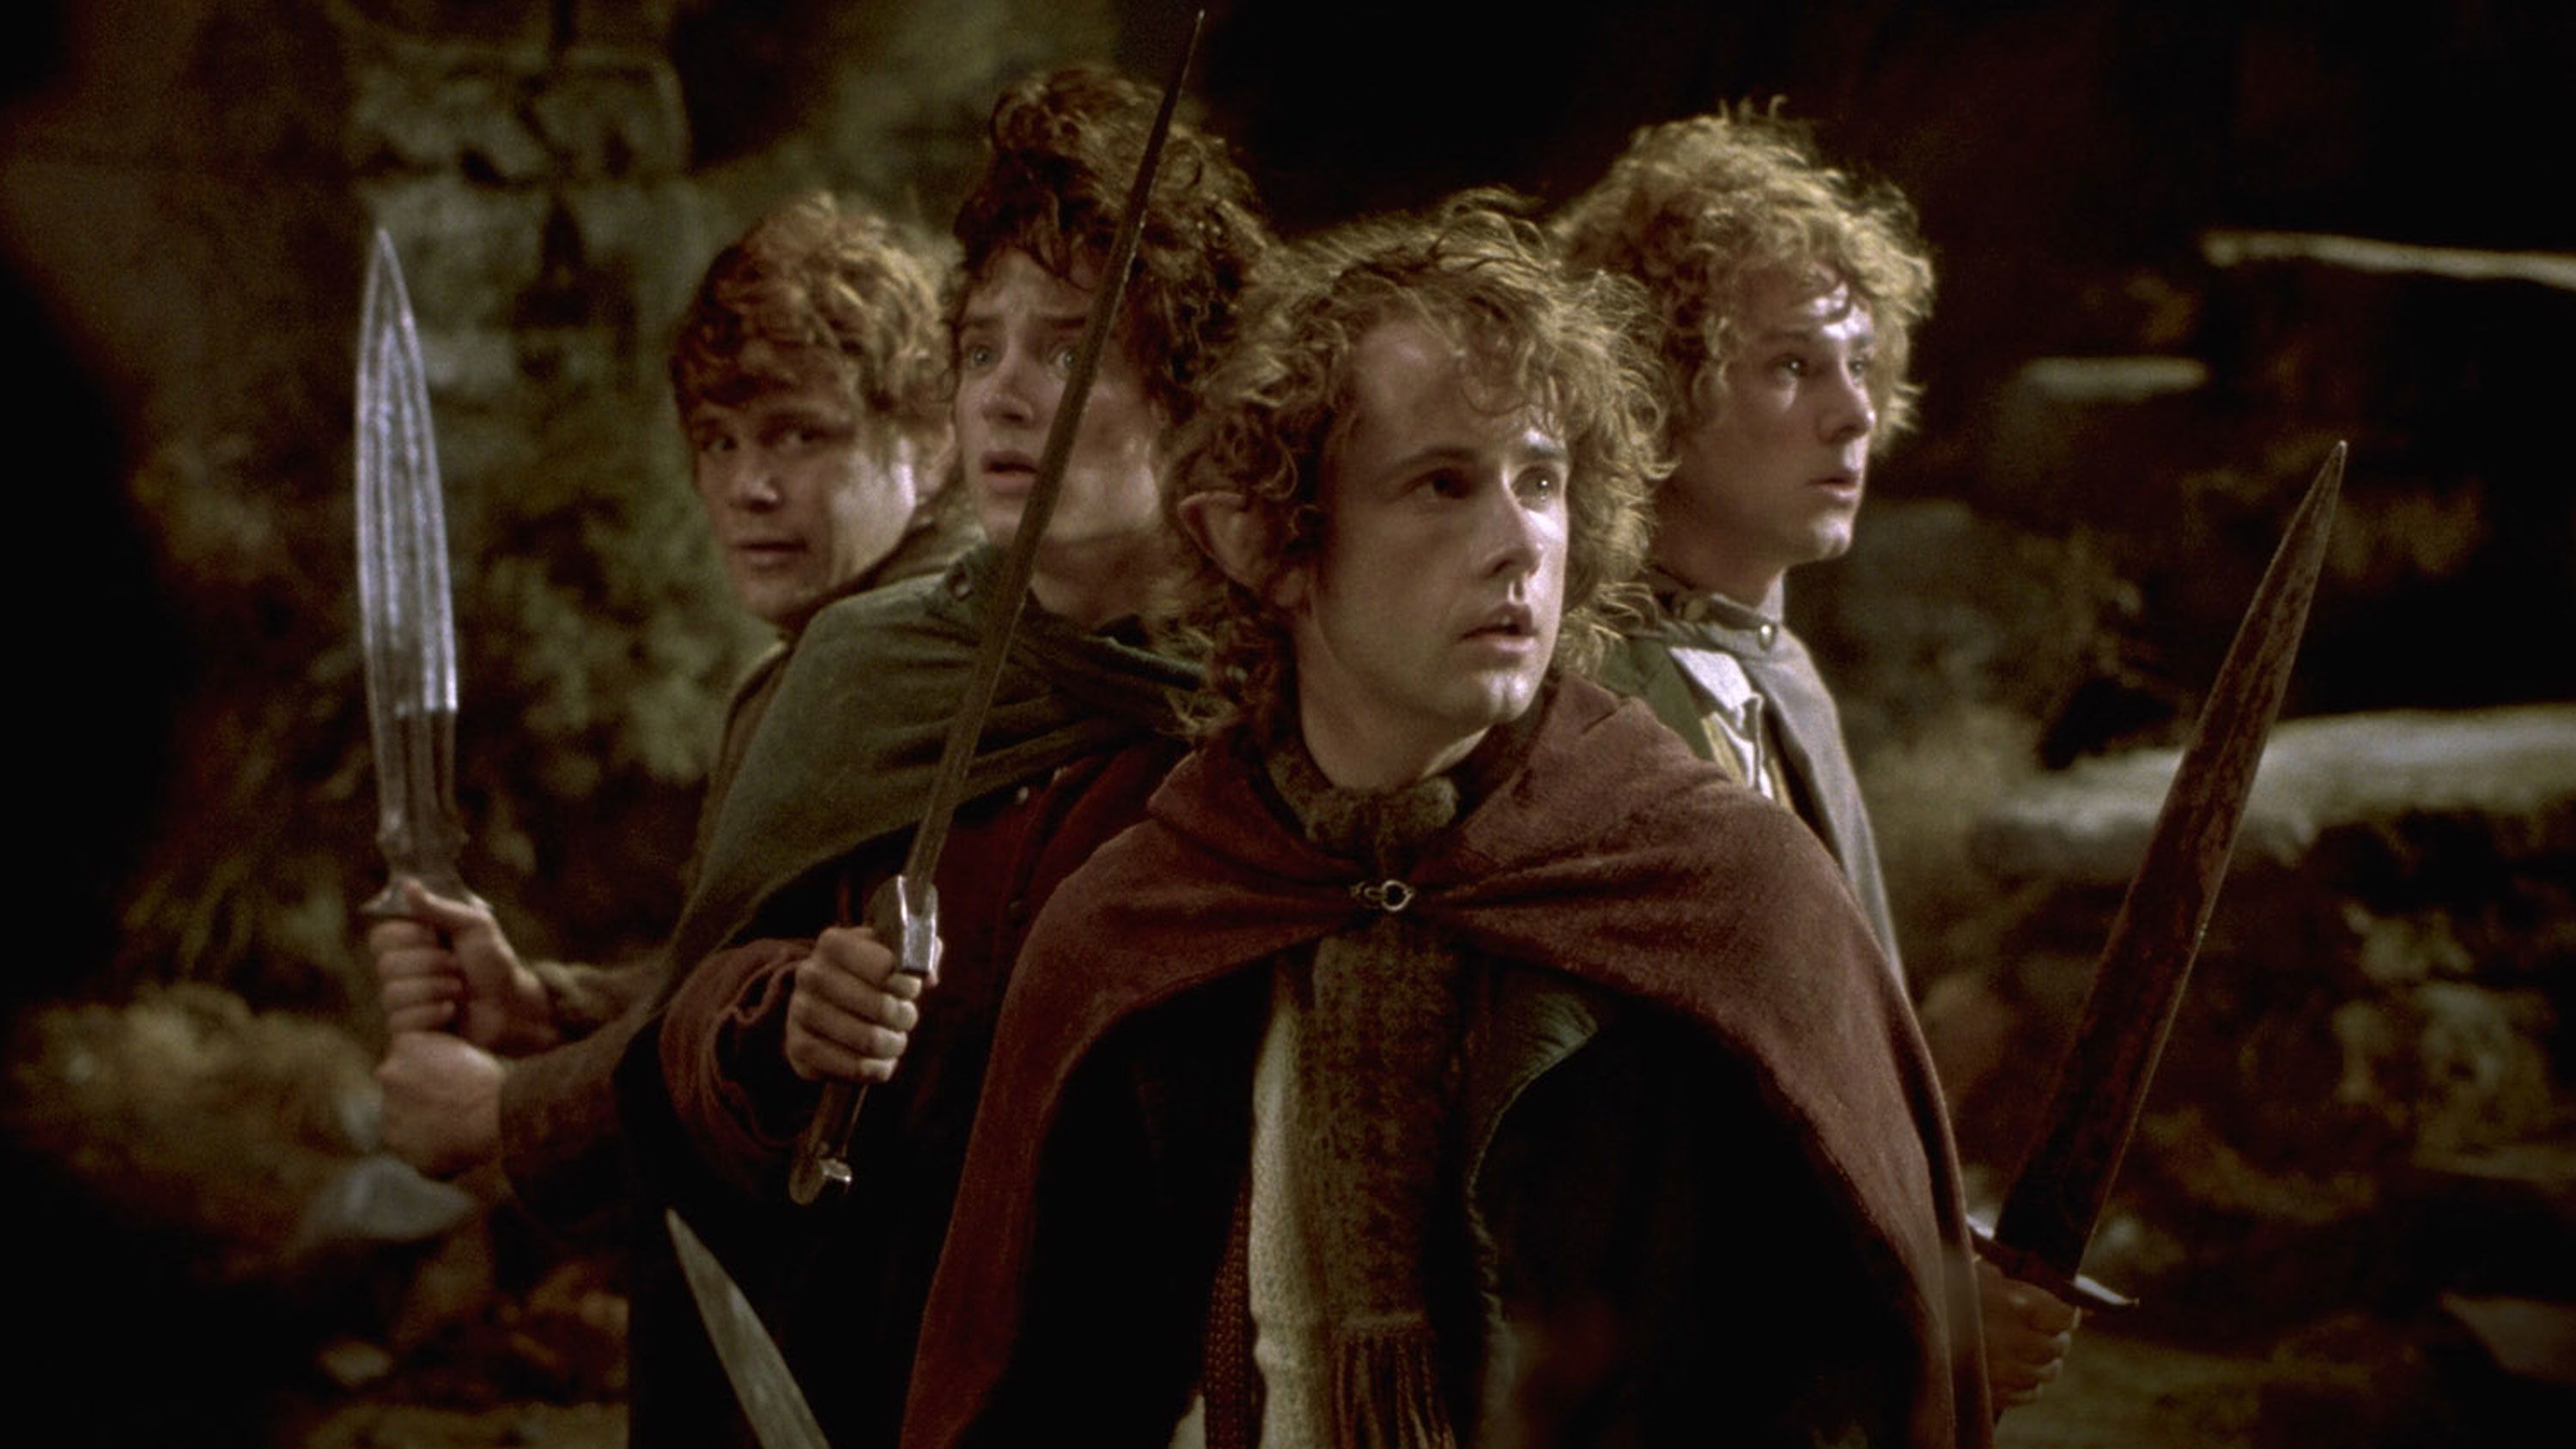 THE LORD OF THE RINGS: FELLOWSHIP OF THE RING, Sean Astin, Elijah Wood, Billy Boyd, Dominic Monaghan, 2001